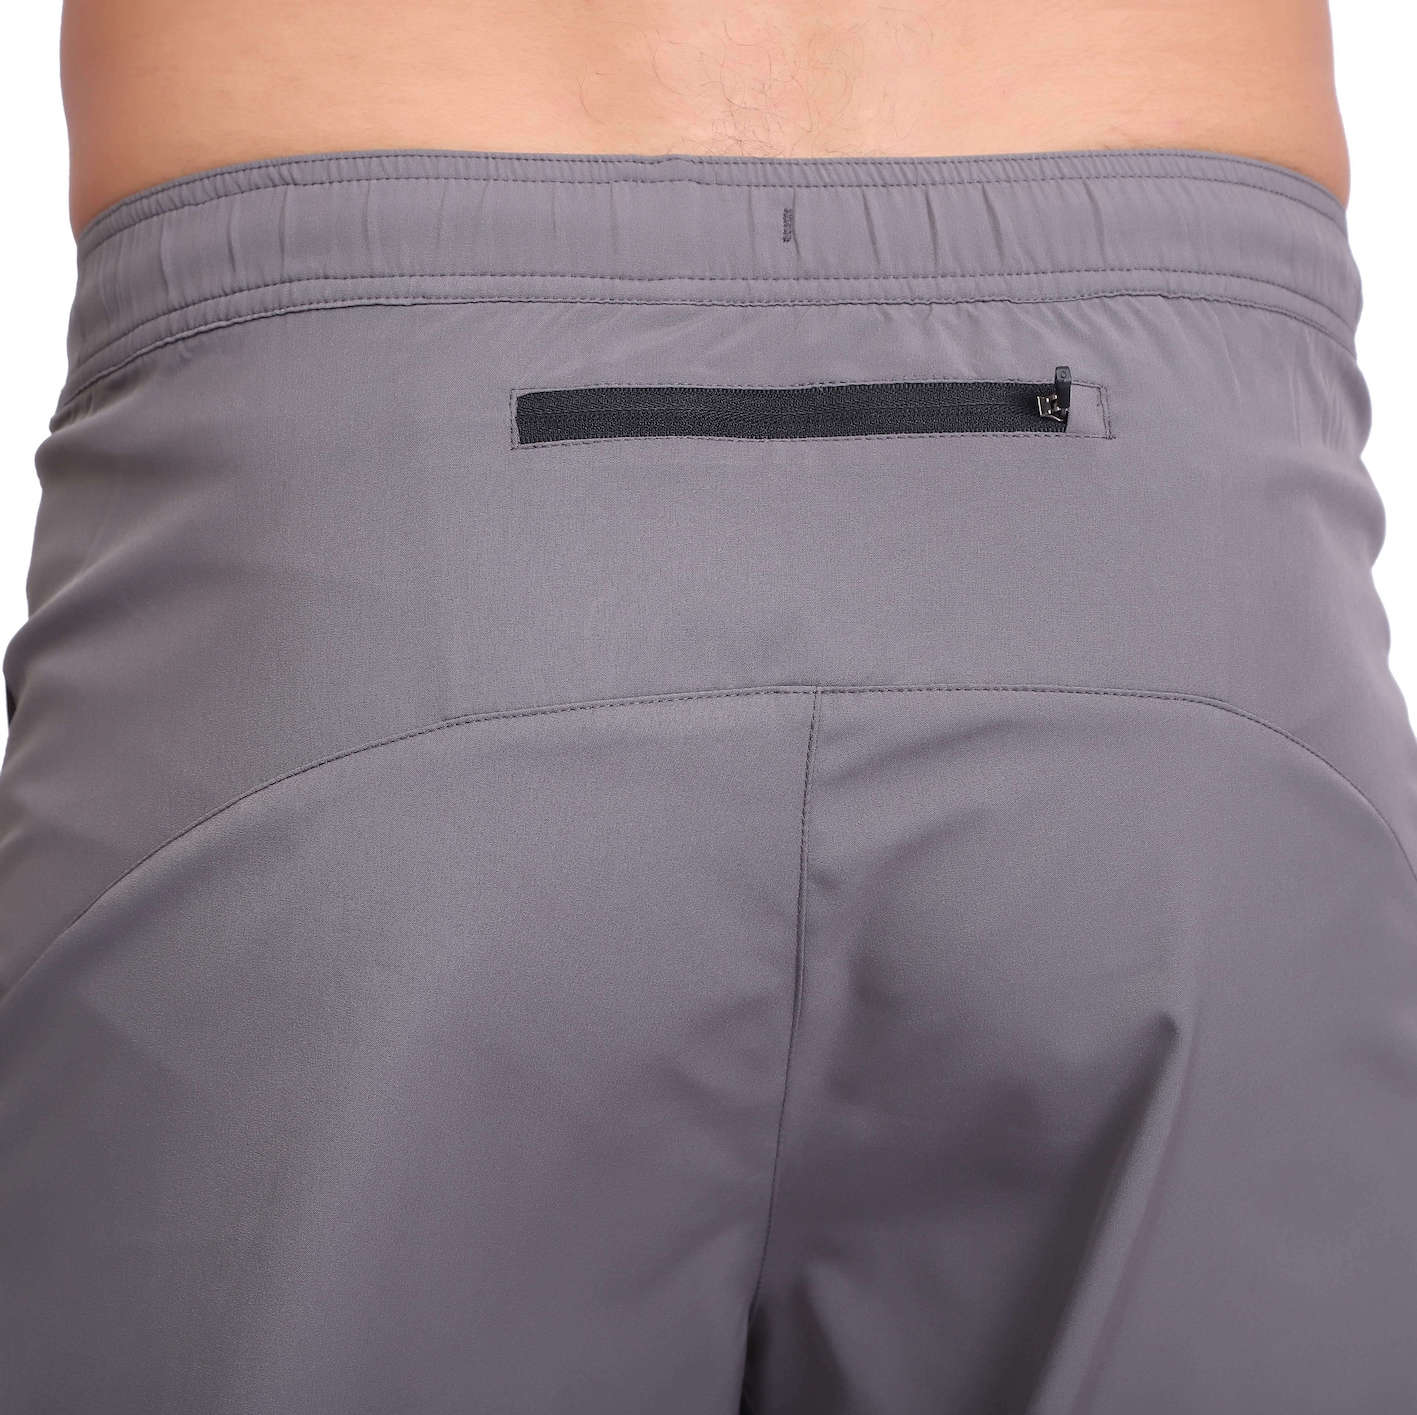 Men's Color Block Quick-Dry Stretch Running Shorts